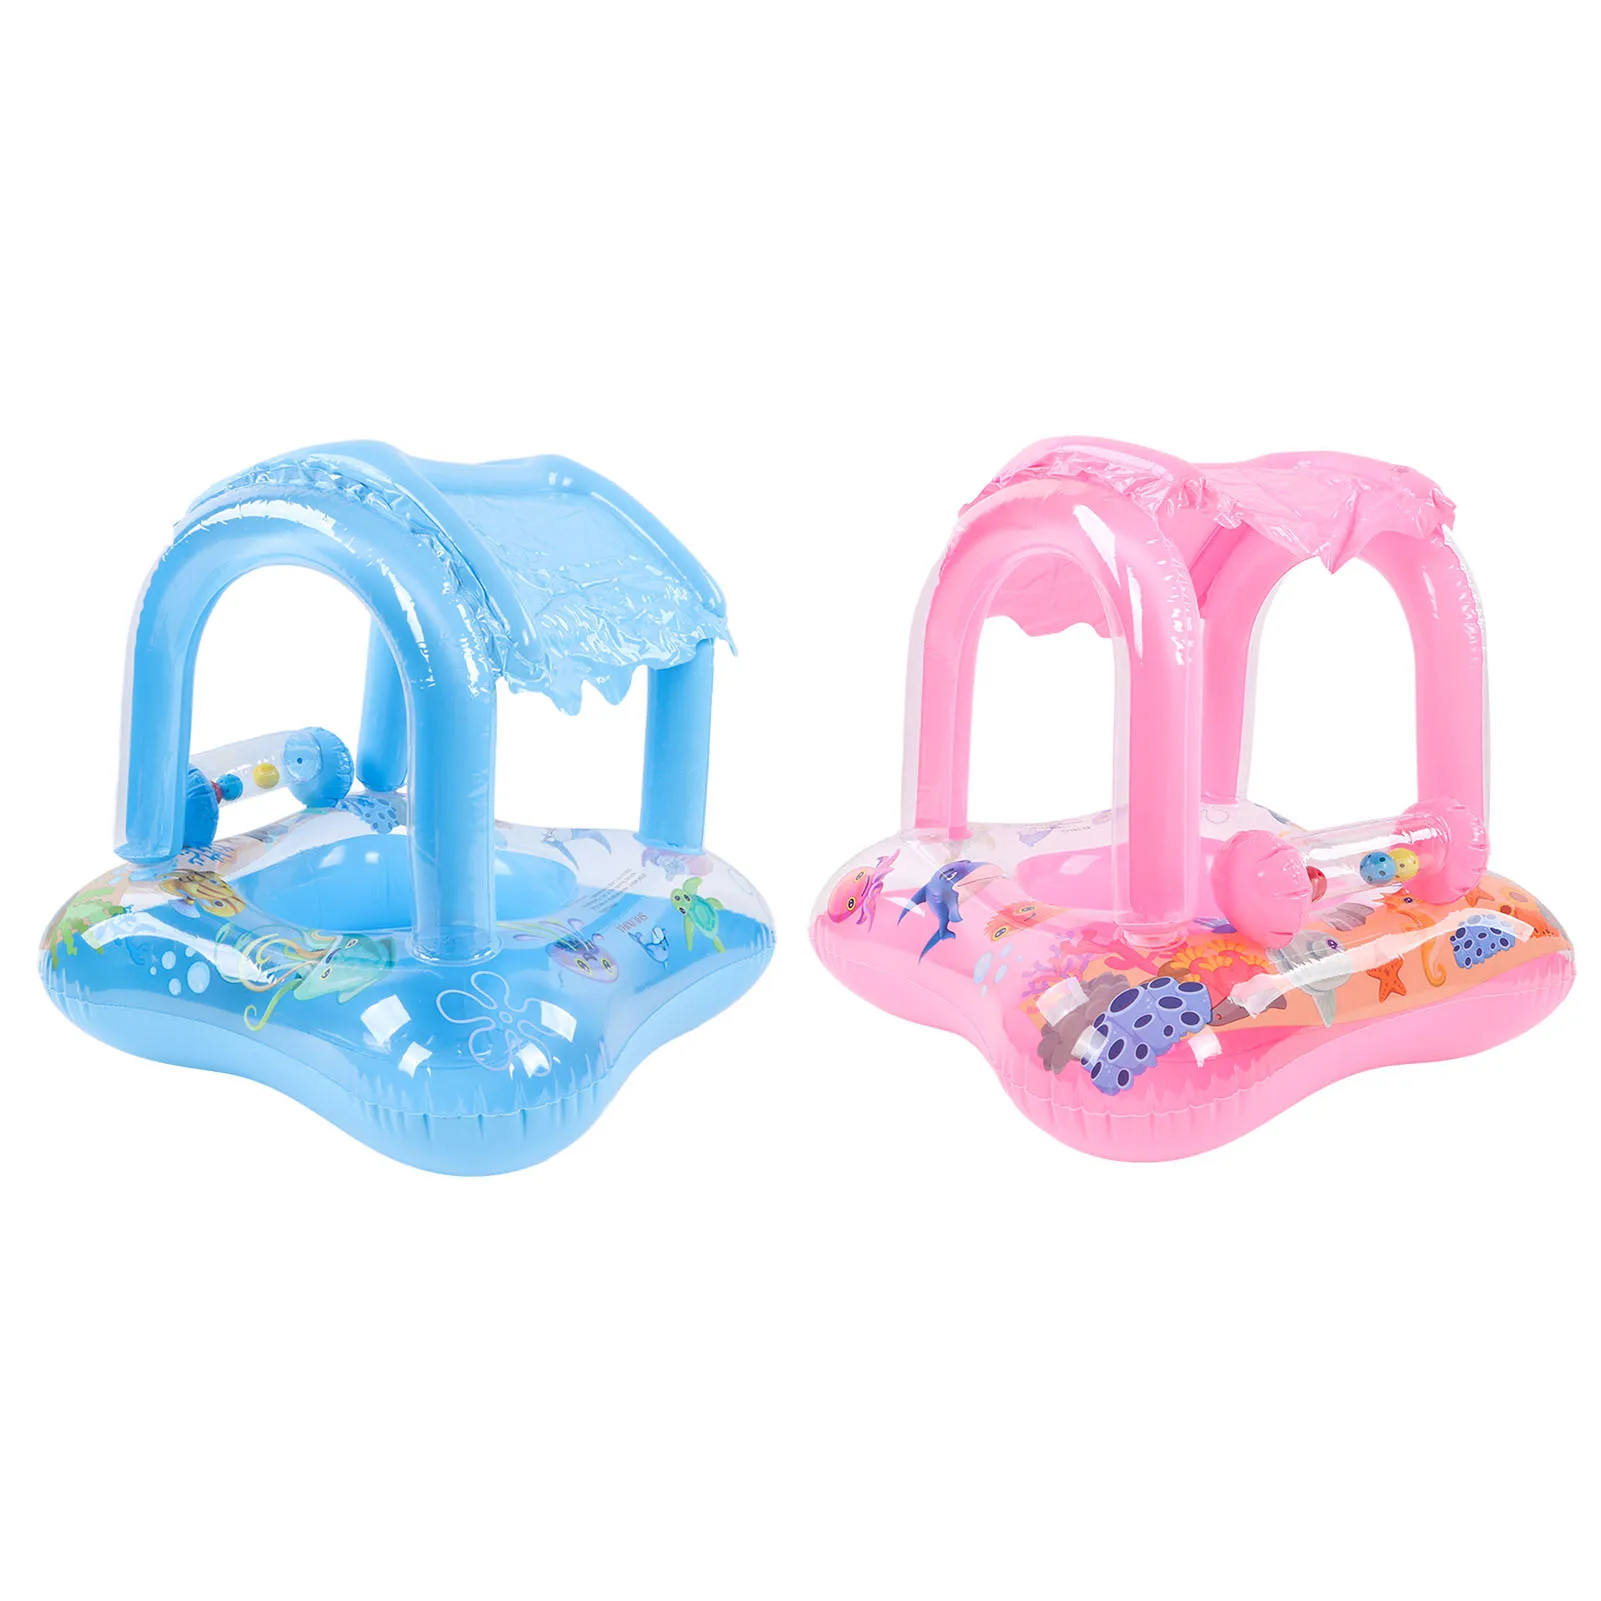 Portable Baby Pool Float Sunshade Swim Ring Infants Seat Boat Inflatable... - $21.99